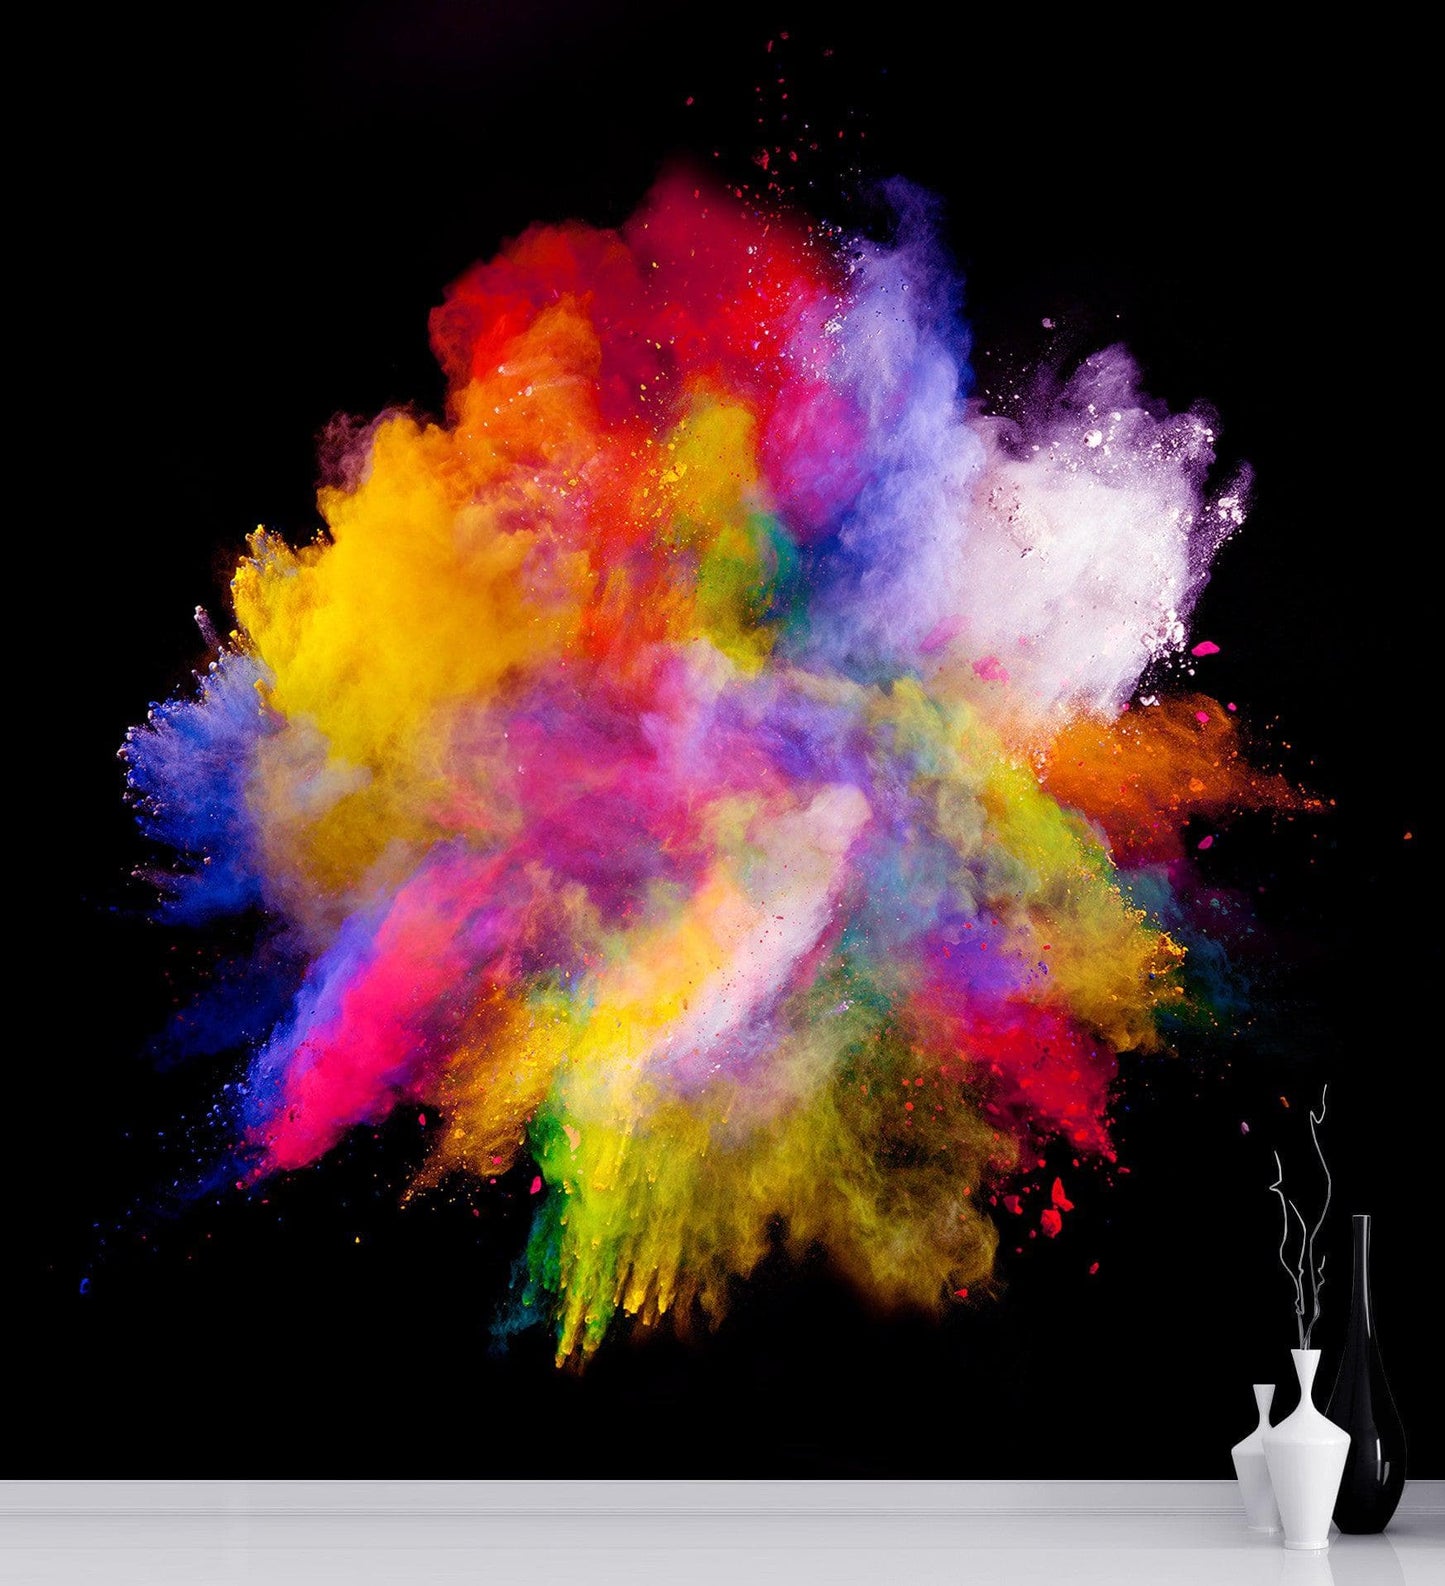 Wall Mural Decal Sticker Burst of Color Powder Abstract #6006